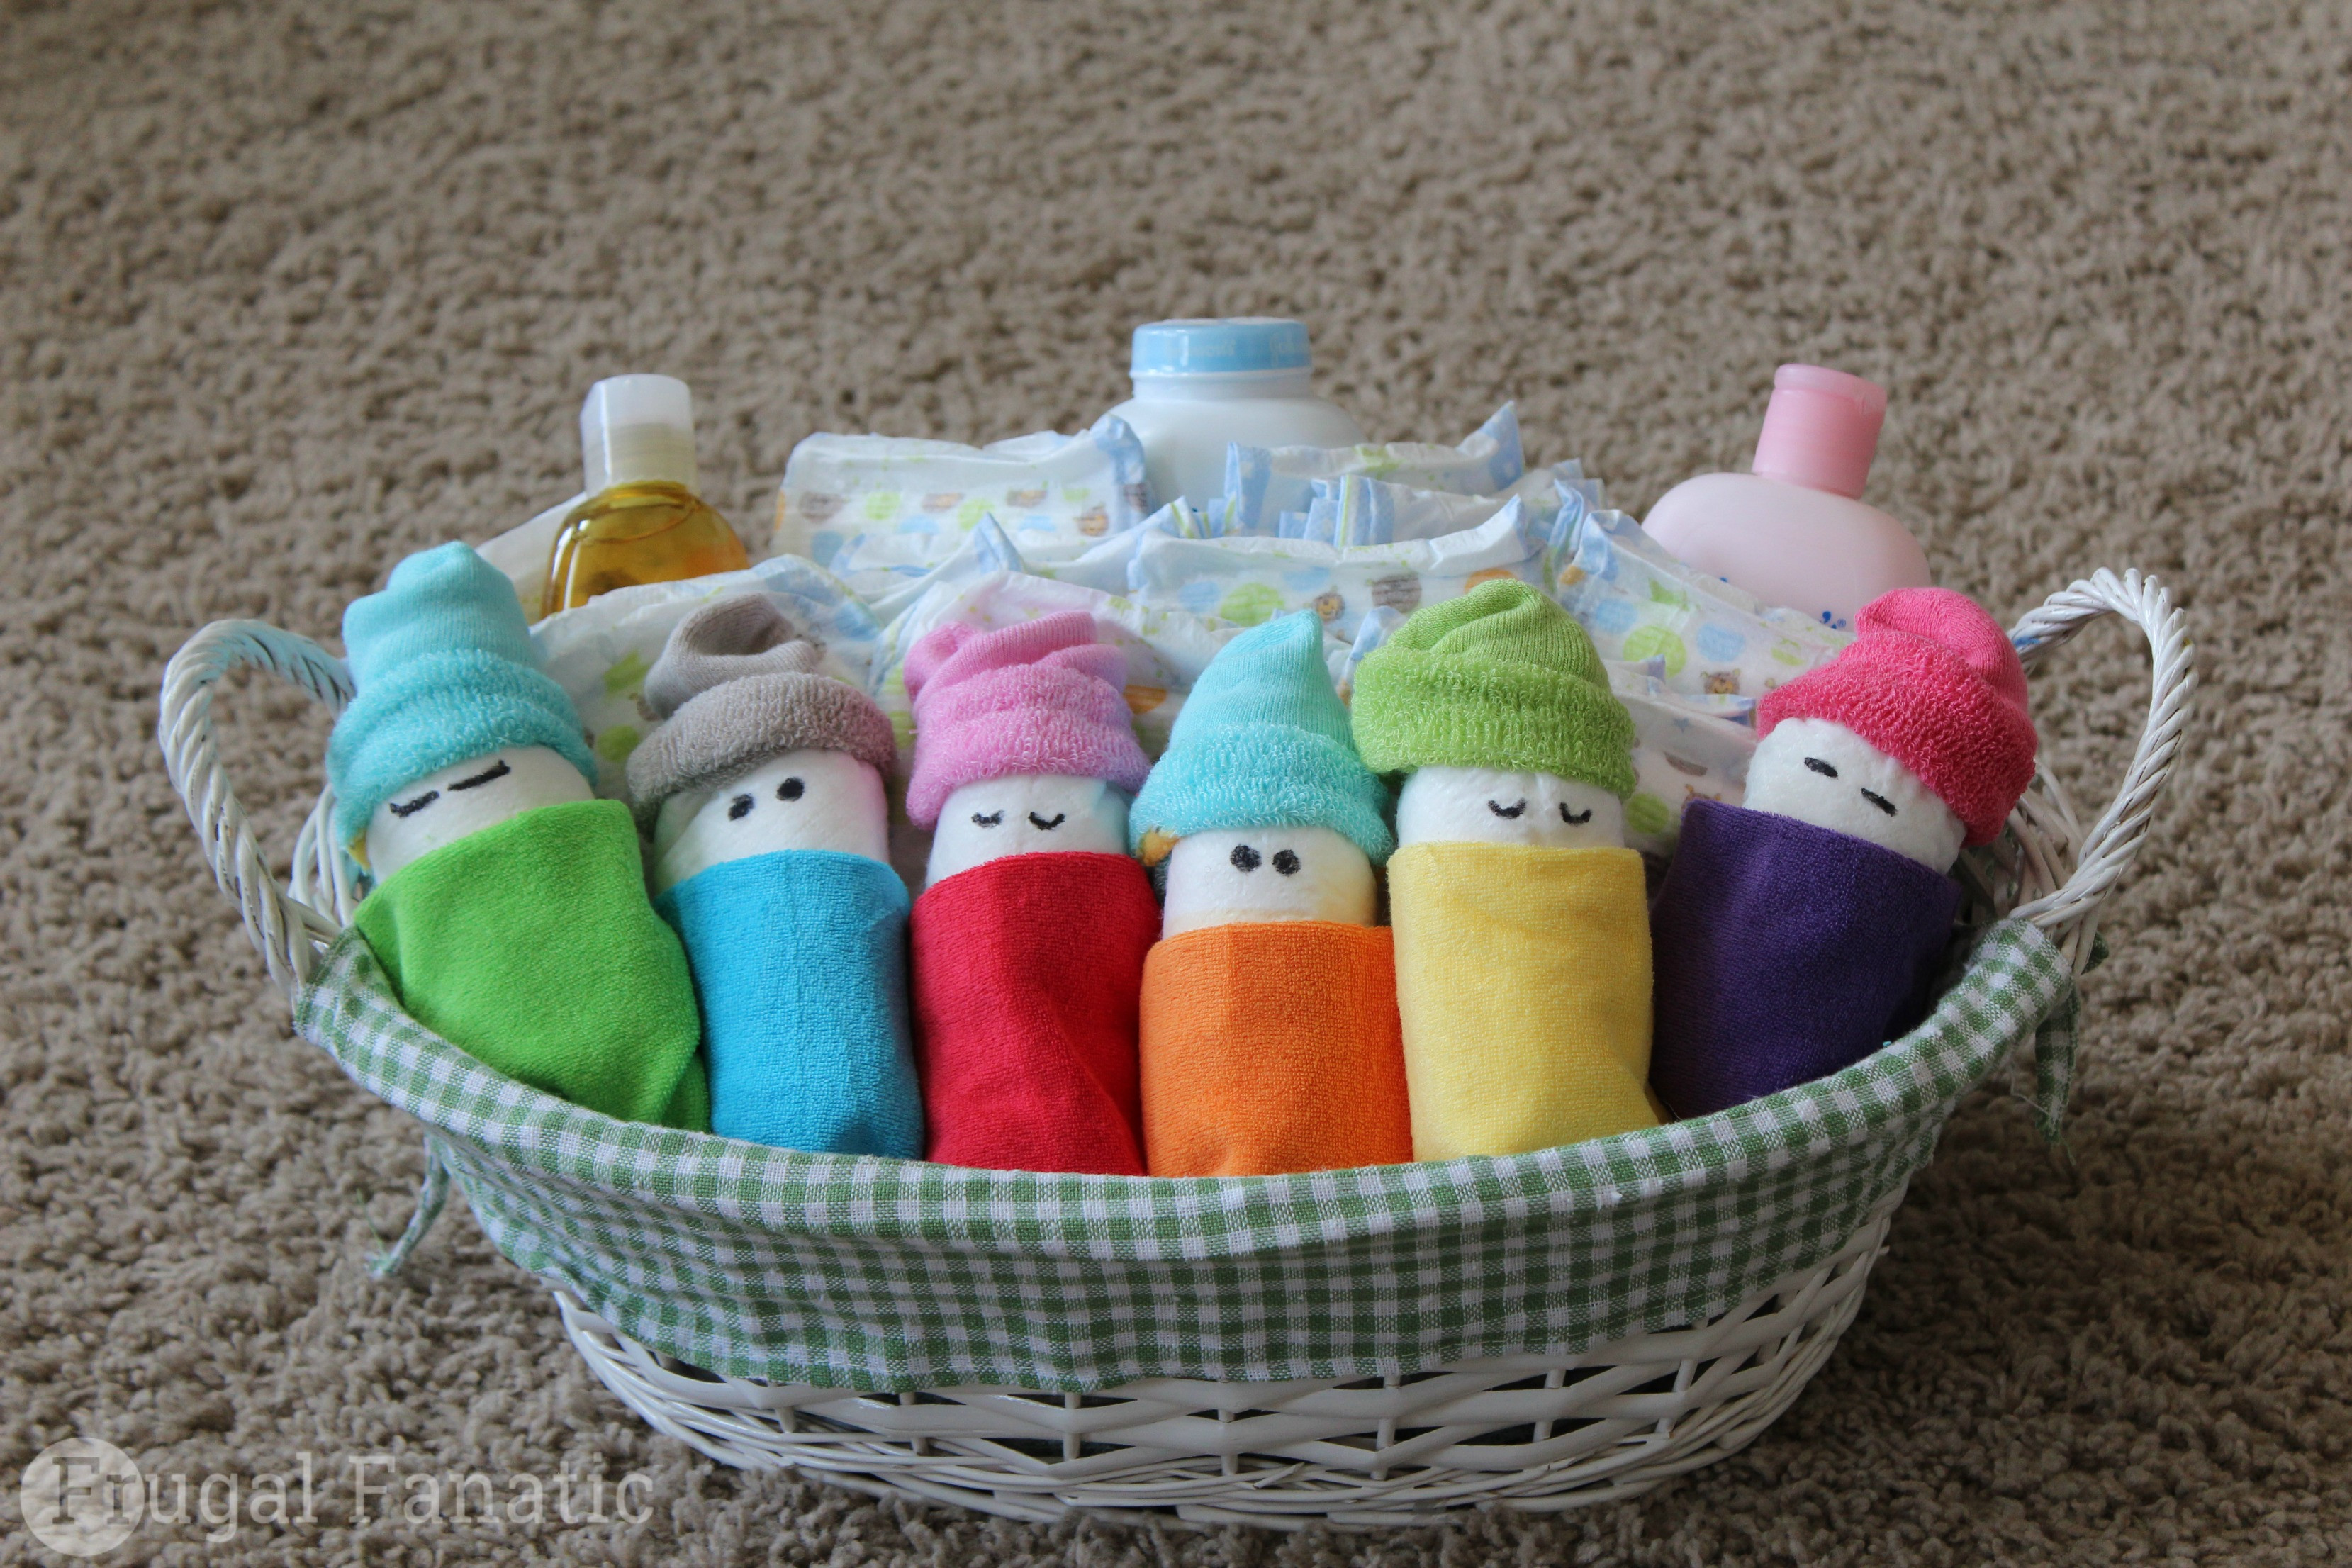 Babyshower Gift Ideas
 DIY Baby Gift Ideas Food ts and more